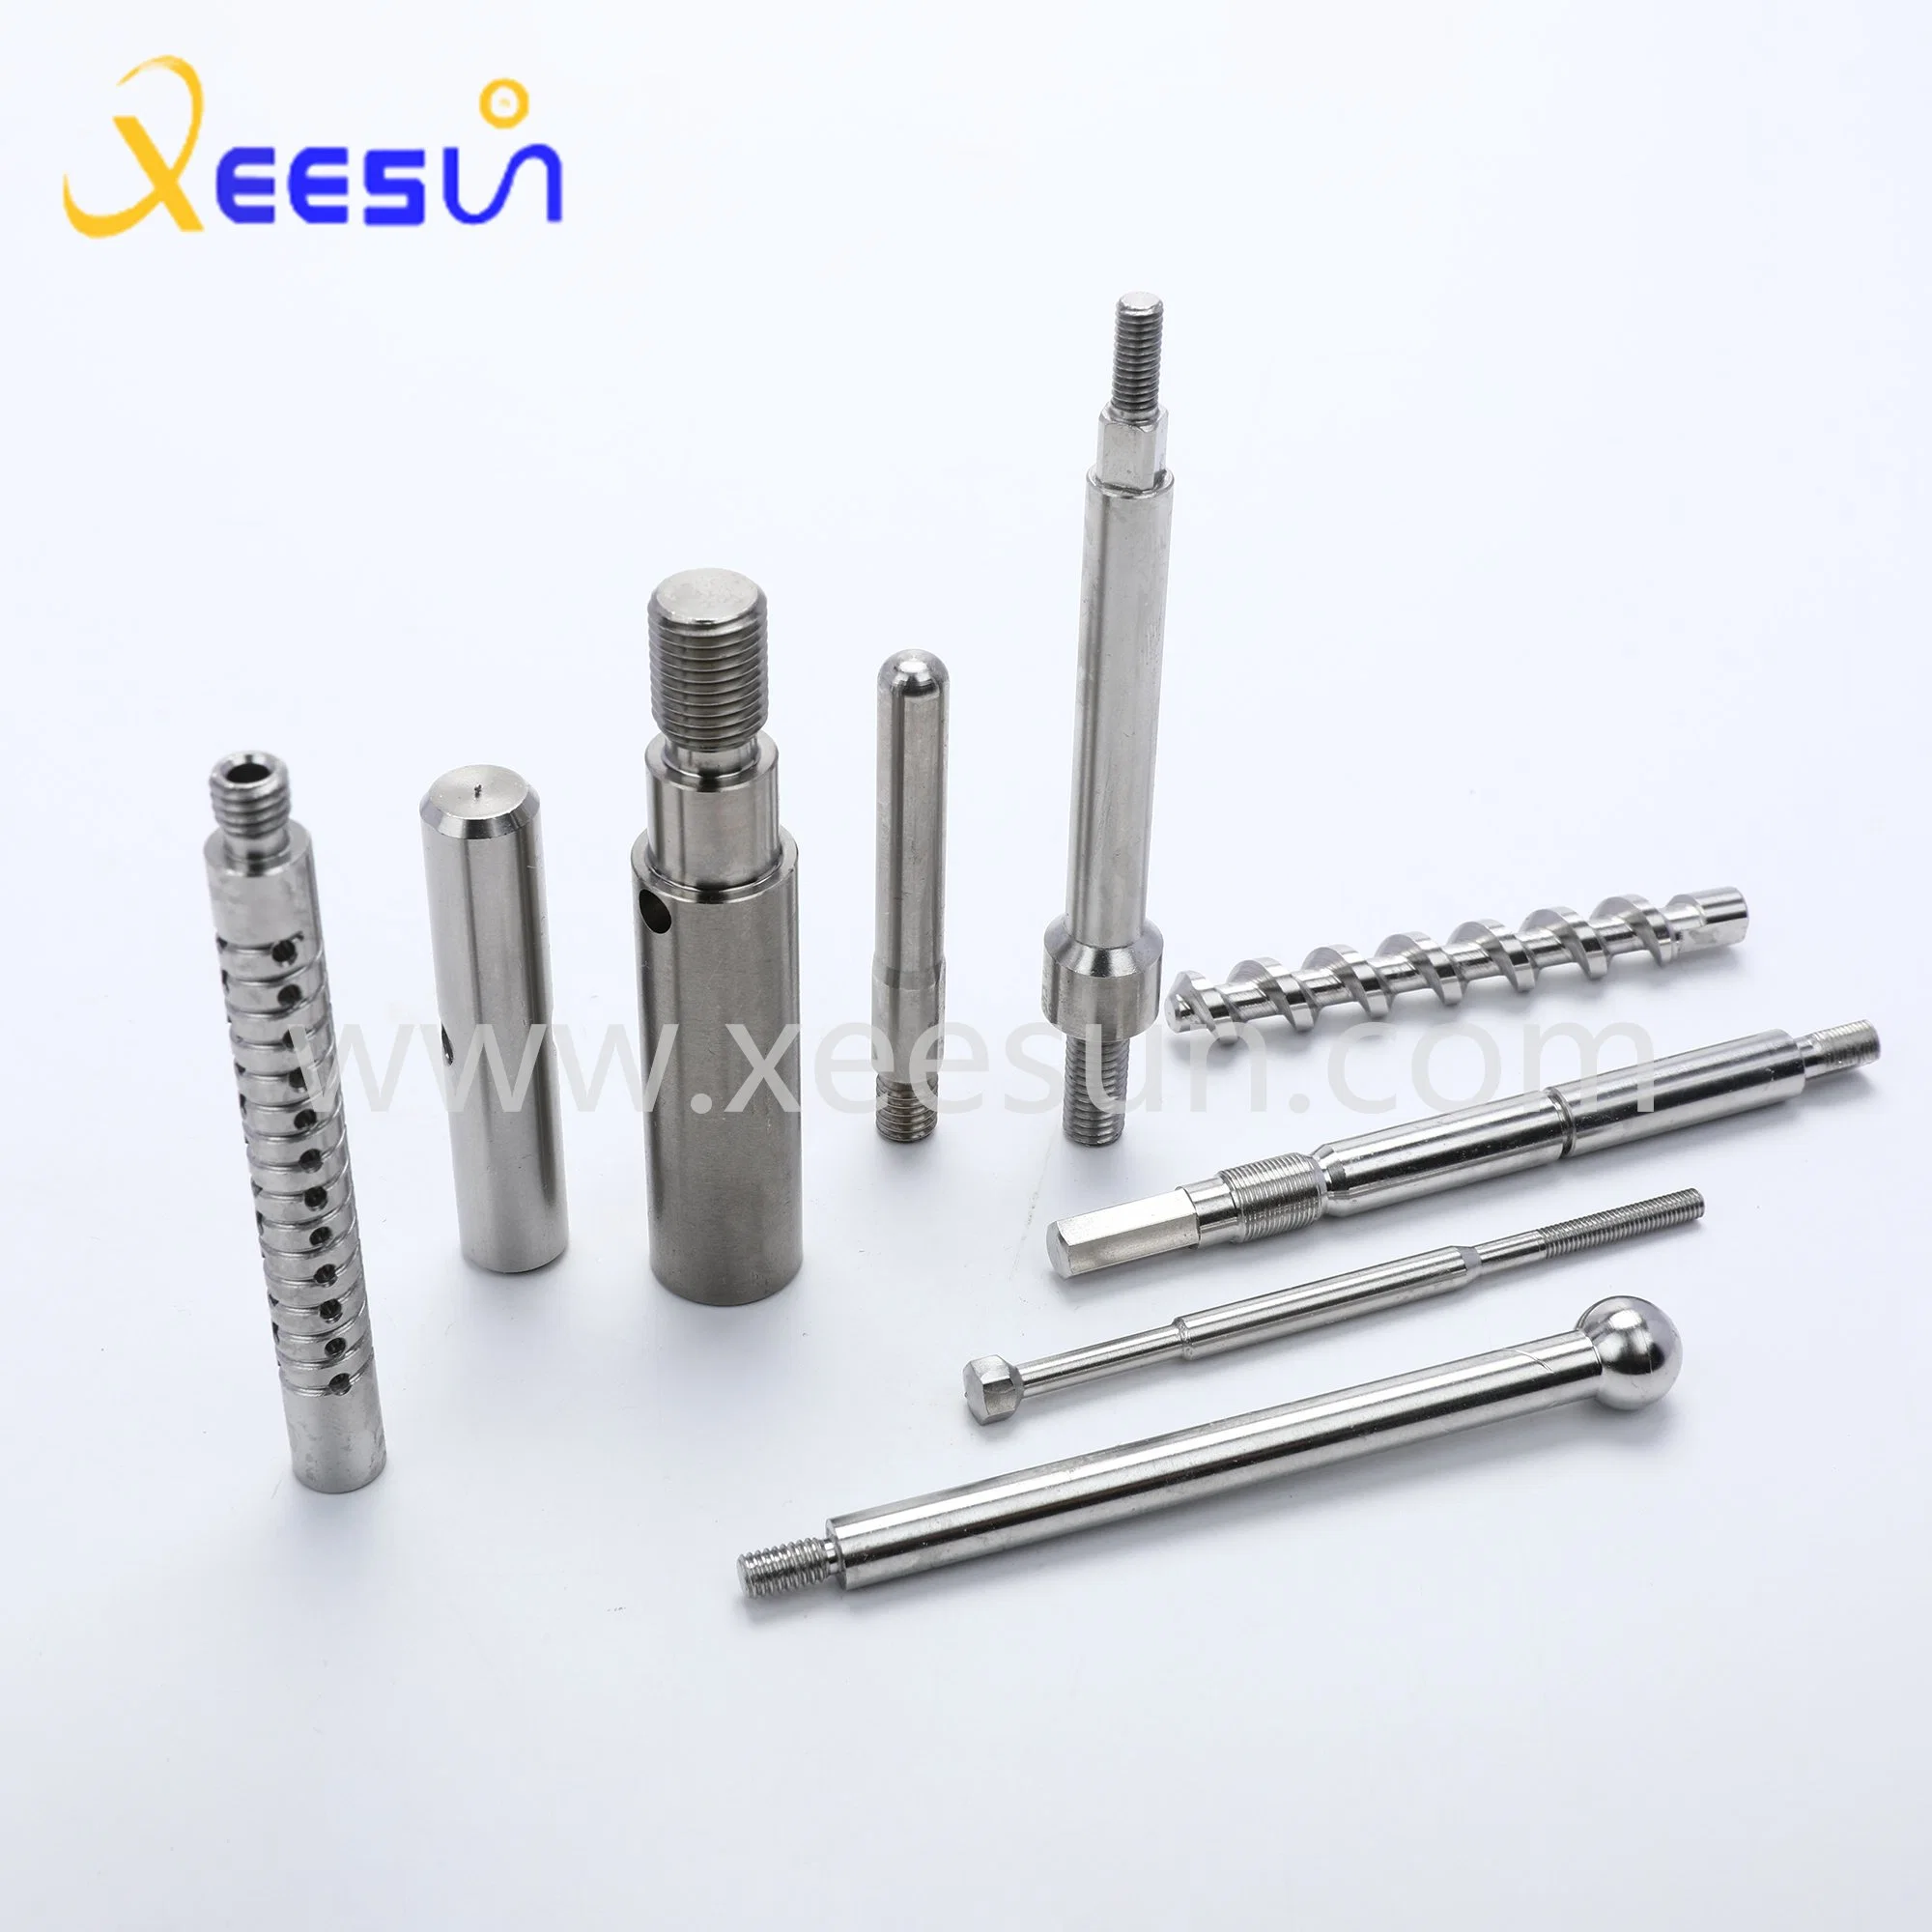 Customized CNC Lathe Hardware for Copper, Aluminum, and Stainless Steel Insulation Materials